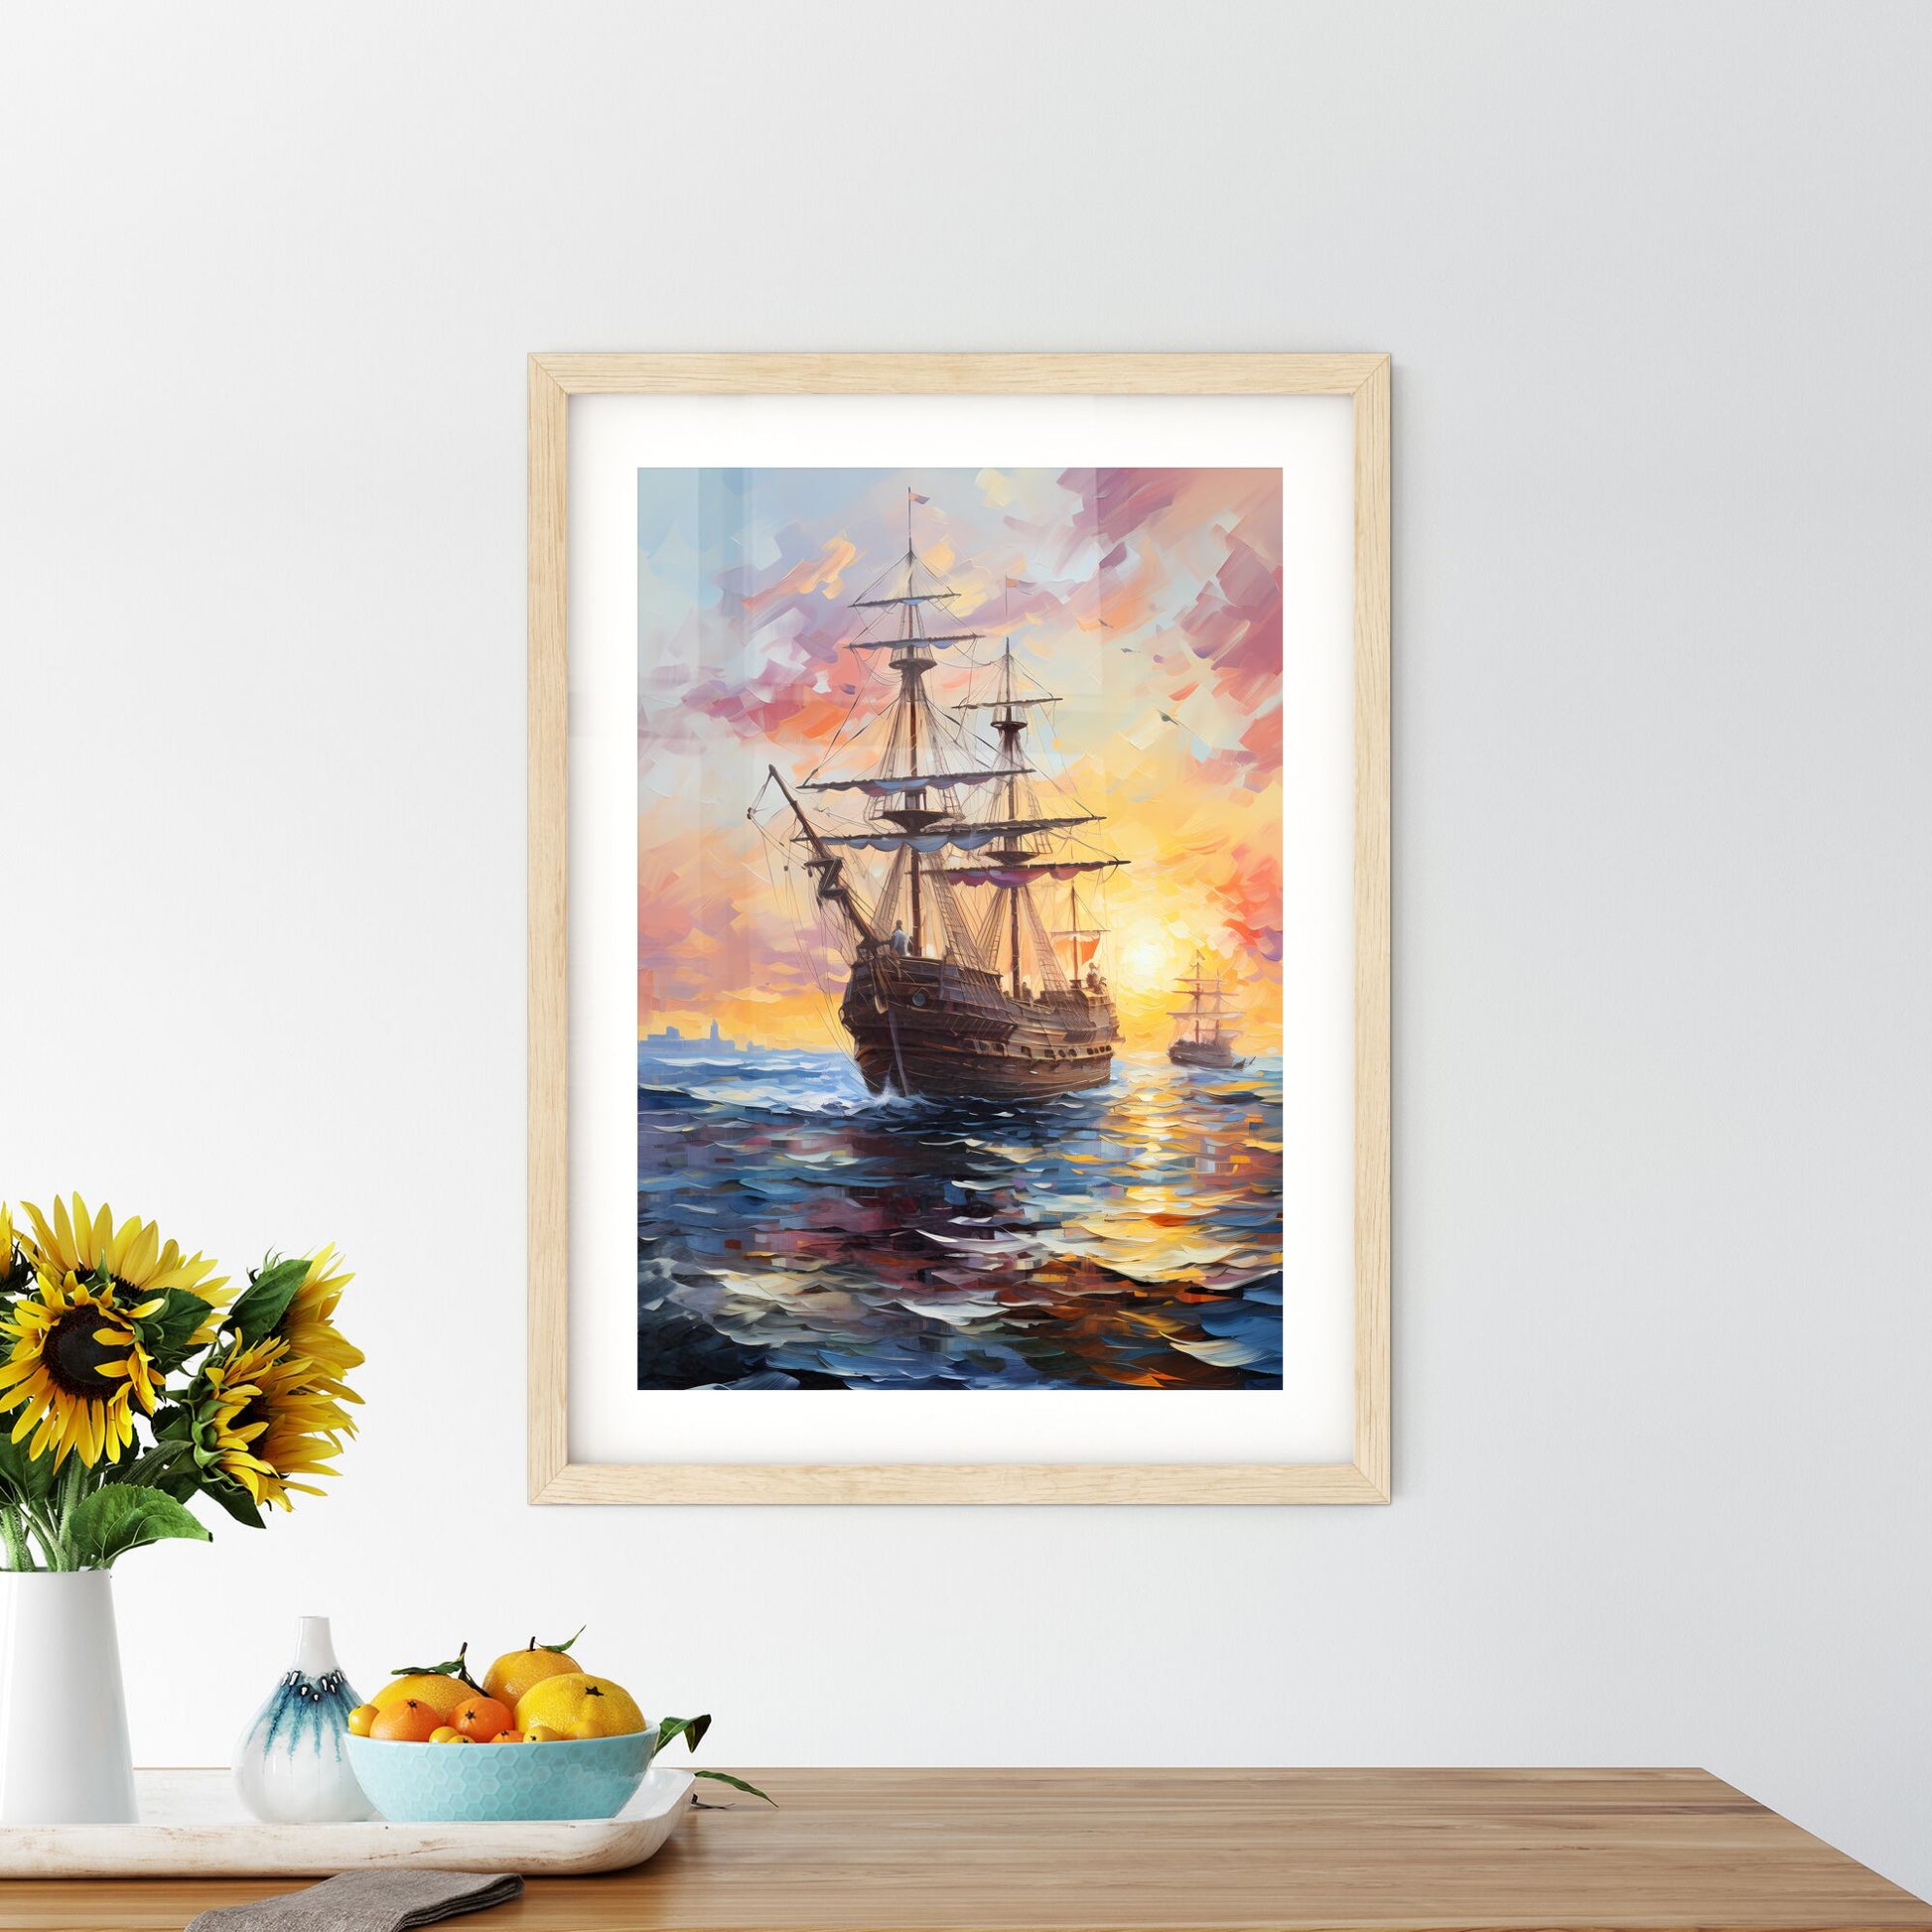 The Ships Of Christopher Columbus - A Painting Of A Ship In The Ocean Default Title